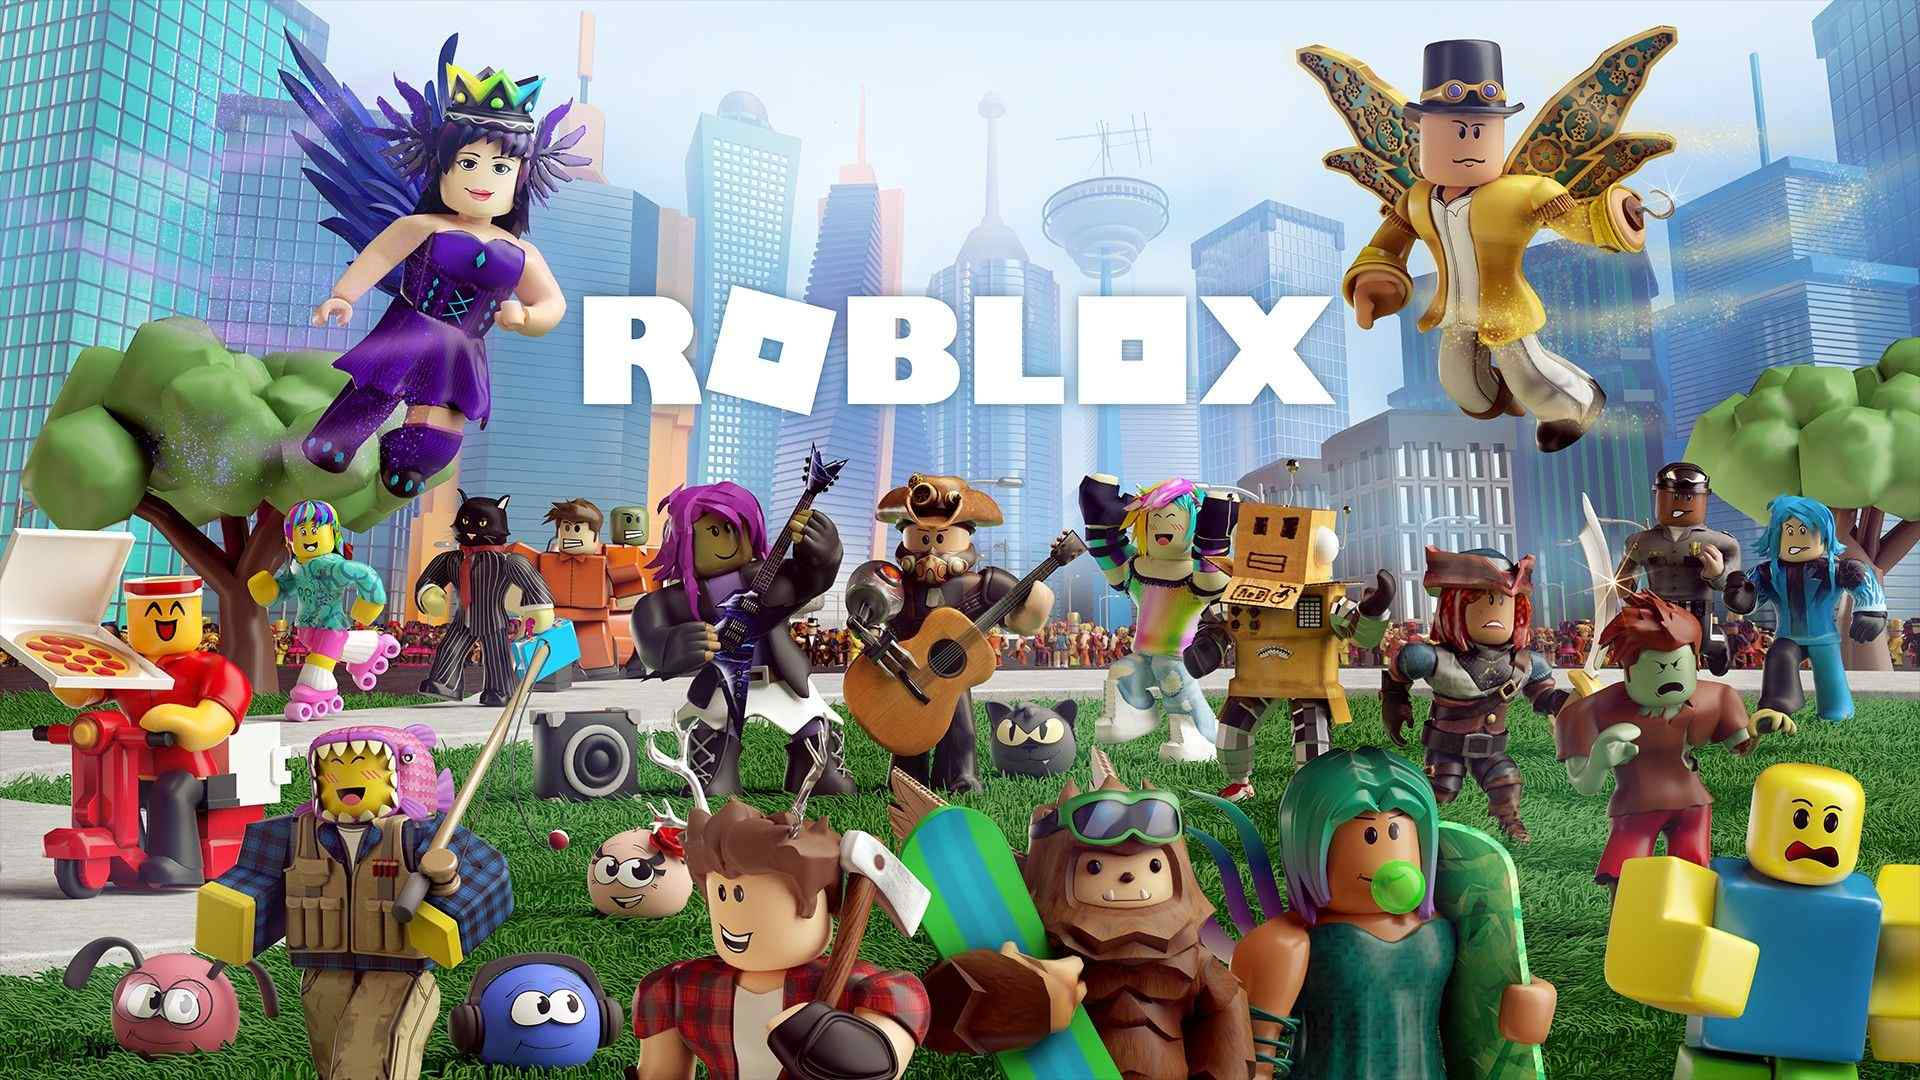 Cool Roblox Characters In The City Wallpaper